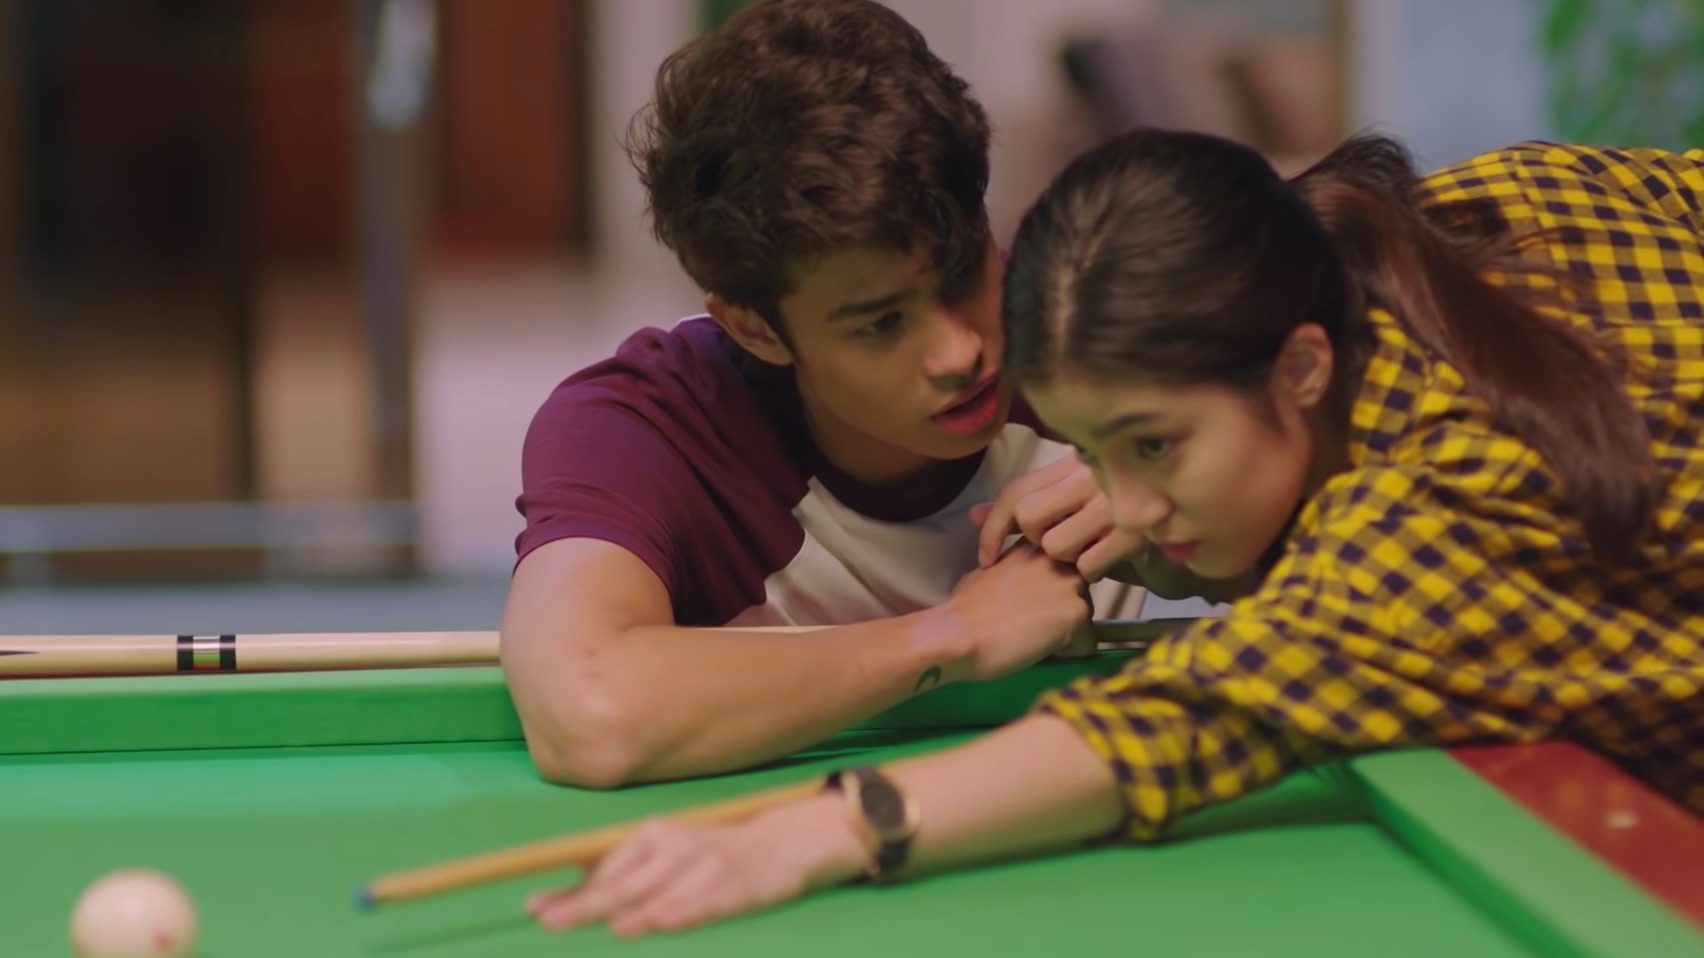 WATCH: Donny Pangilinan and Belle Mariano meet their match in ‘He’s Into Her’ trailer